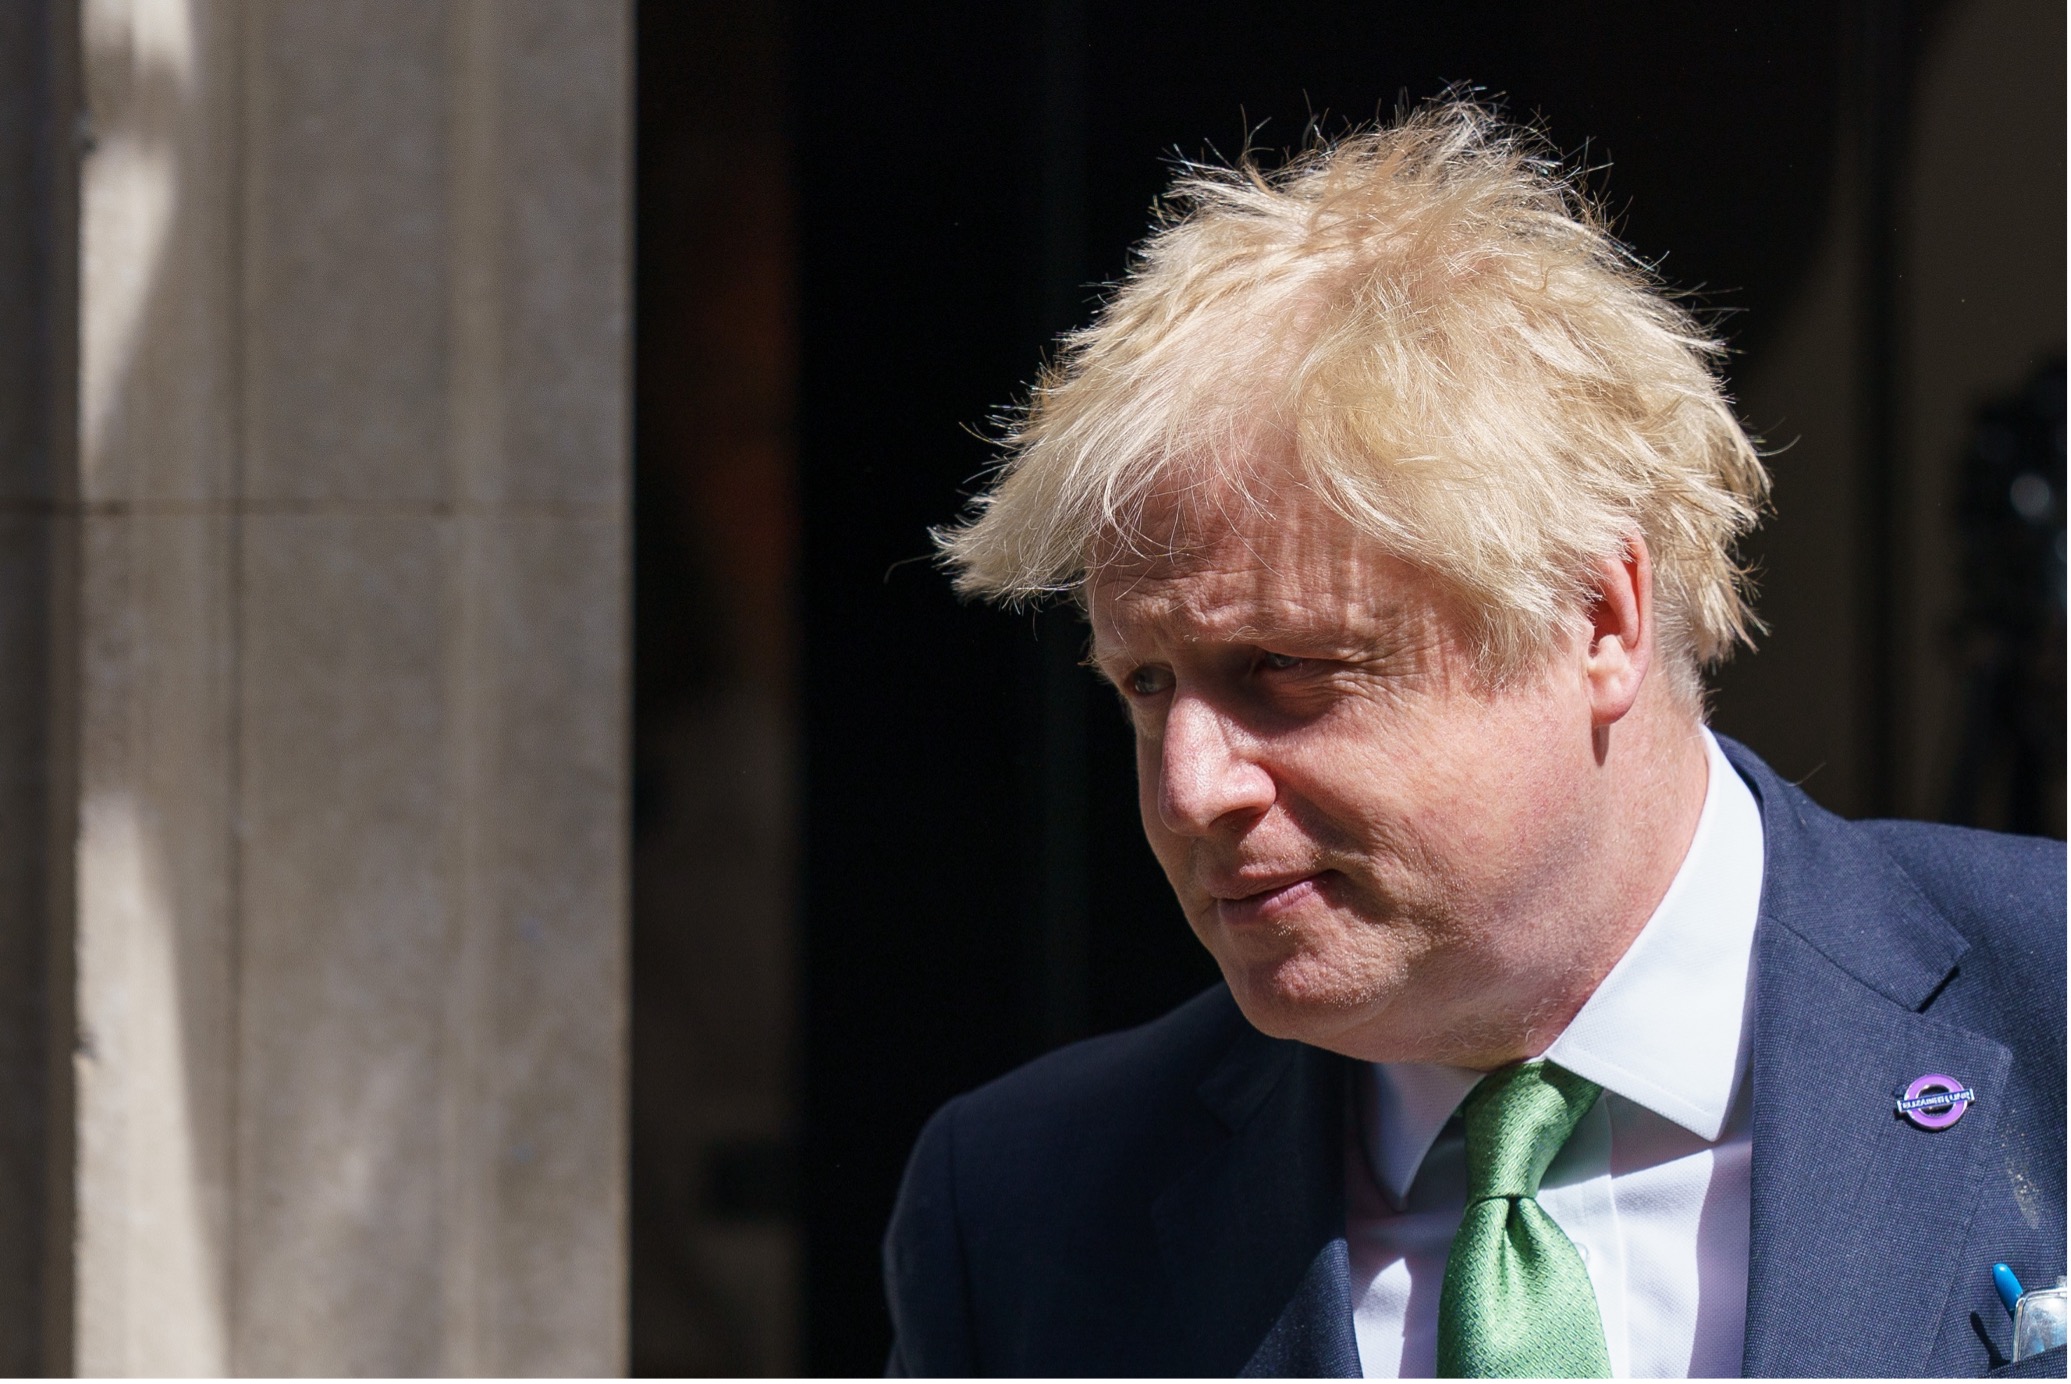 Boris Johnson leaves No 10 Downing Street. Some of his key officials are set to face the Covid inquiry this week.